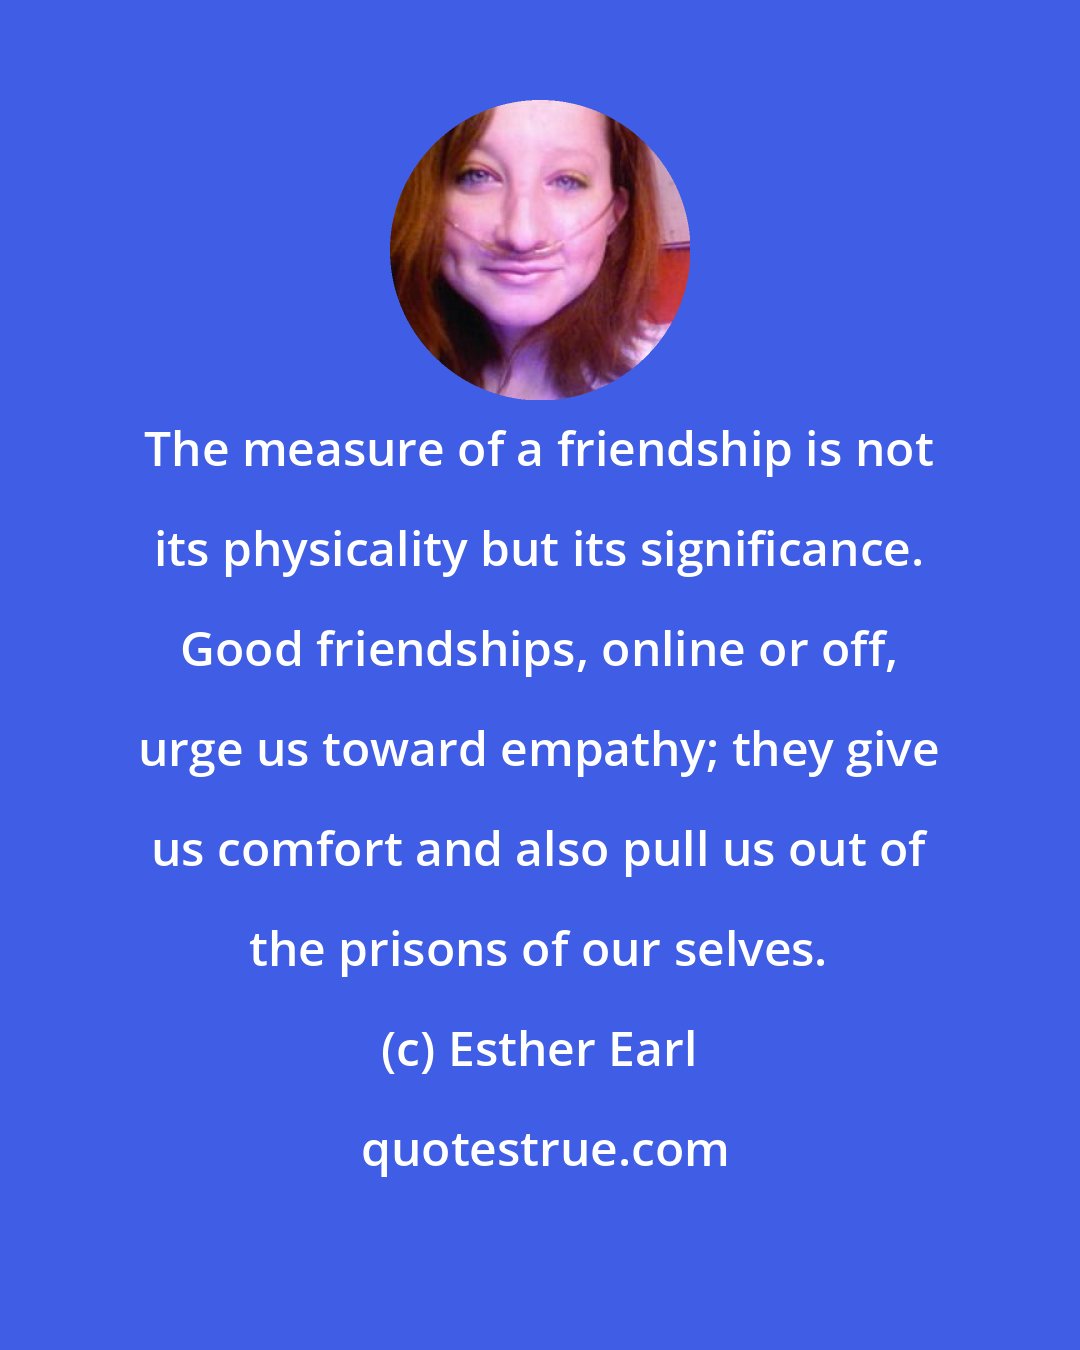 Esther Earl: The measure of a friendship is not its physicality but its significance. Good friendships, online or off, urge us toward empathy; they give us comfort and also pull us out of the prisons of our selves.